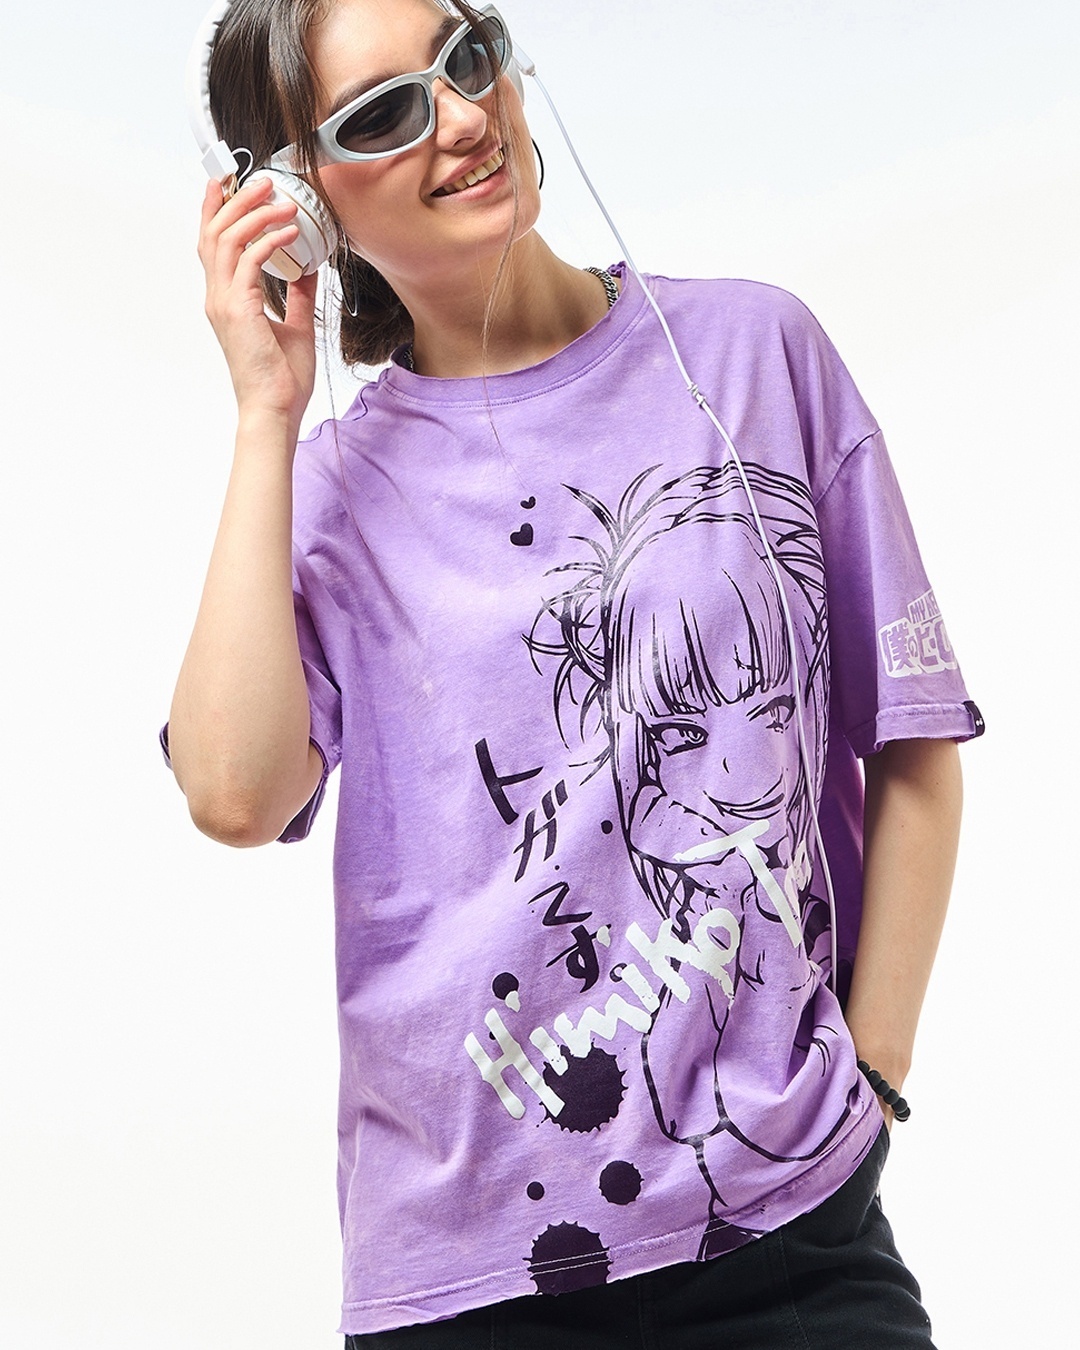 Women's Purple Graphic Printed Oversized T-shirt paired with leather skirt
